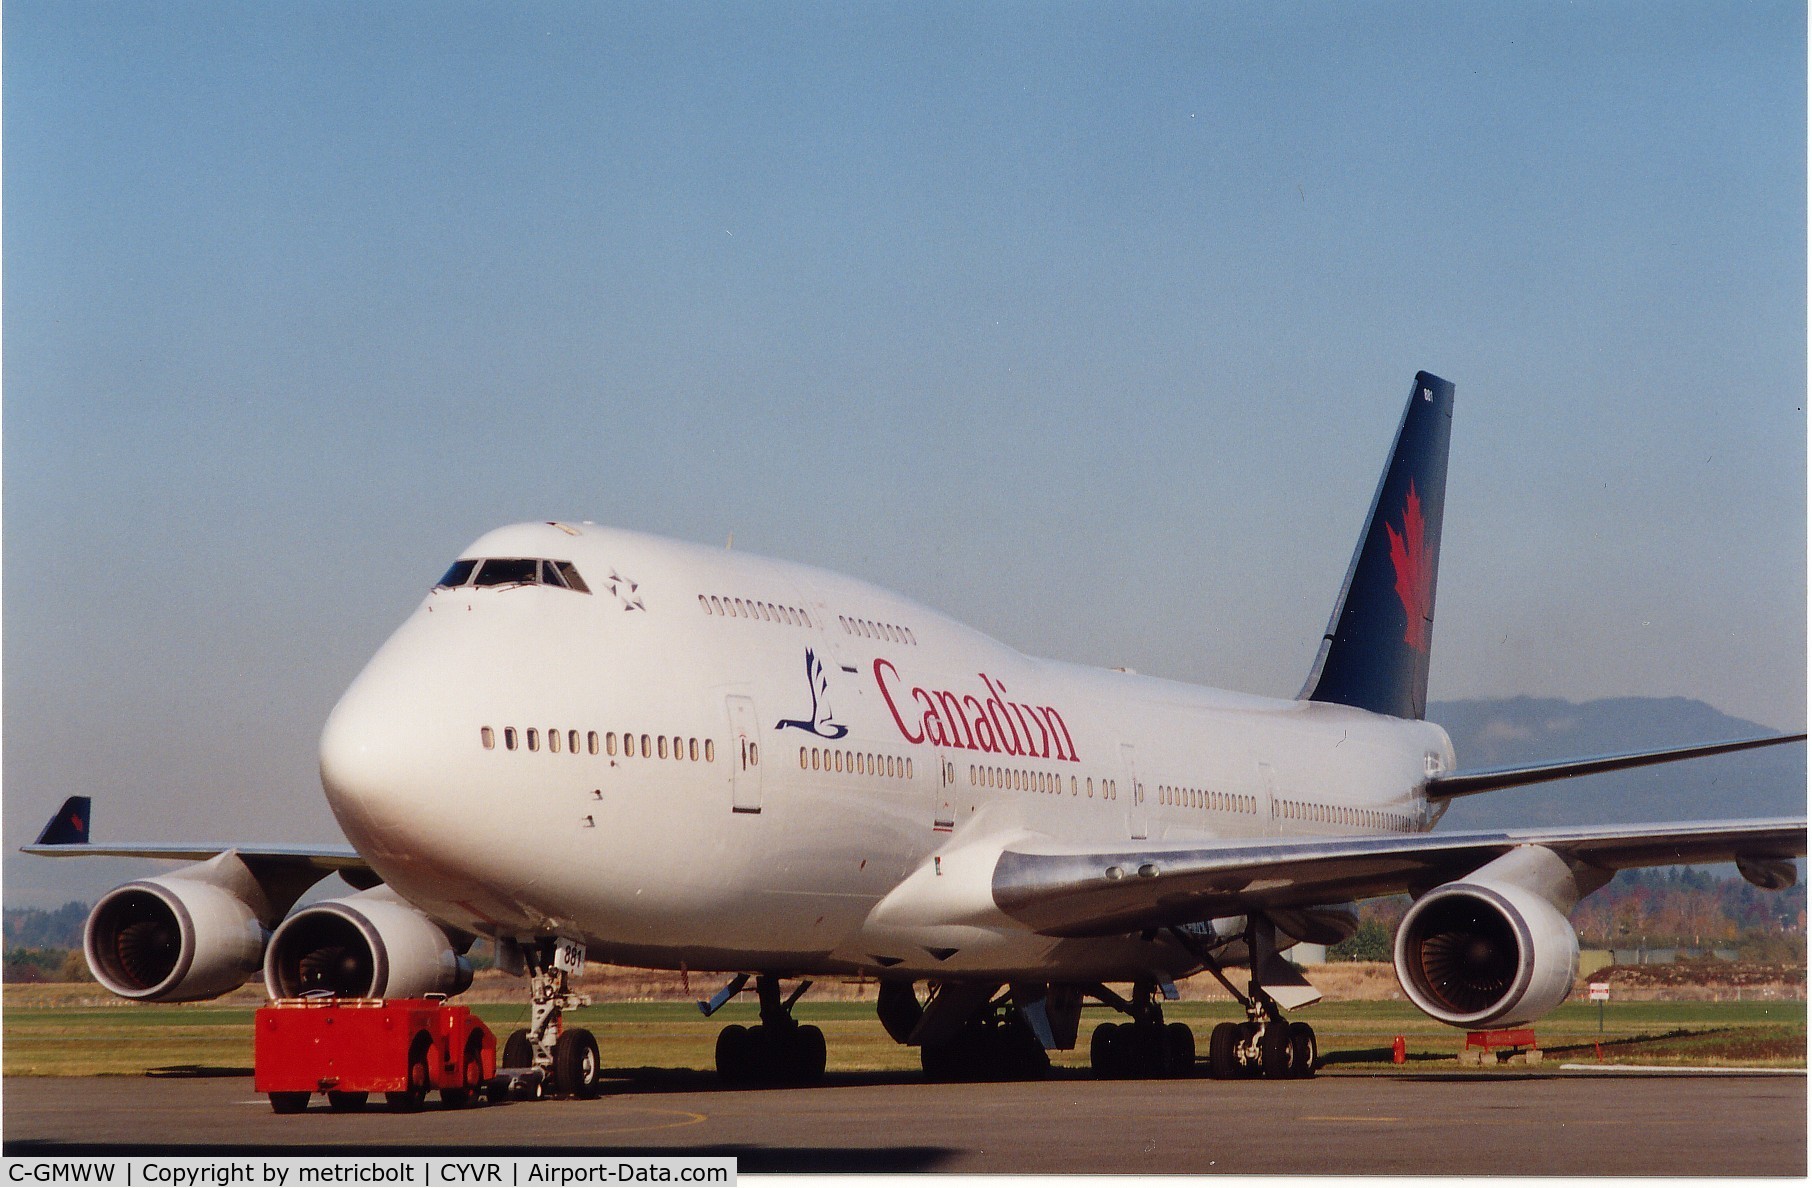 C-GMWW, 1990 Boeing 747-475 C/N 24883, C-GMWW the first Canadian Airlines B747 to be painted in Air Canada colours.